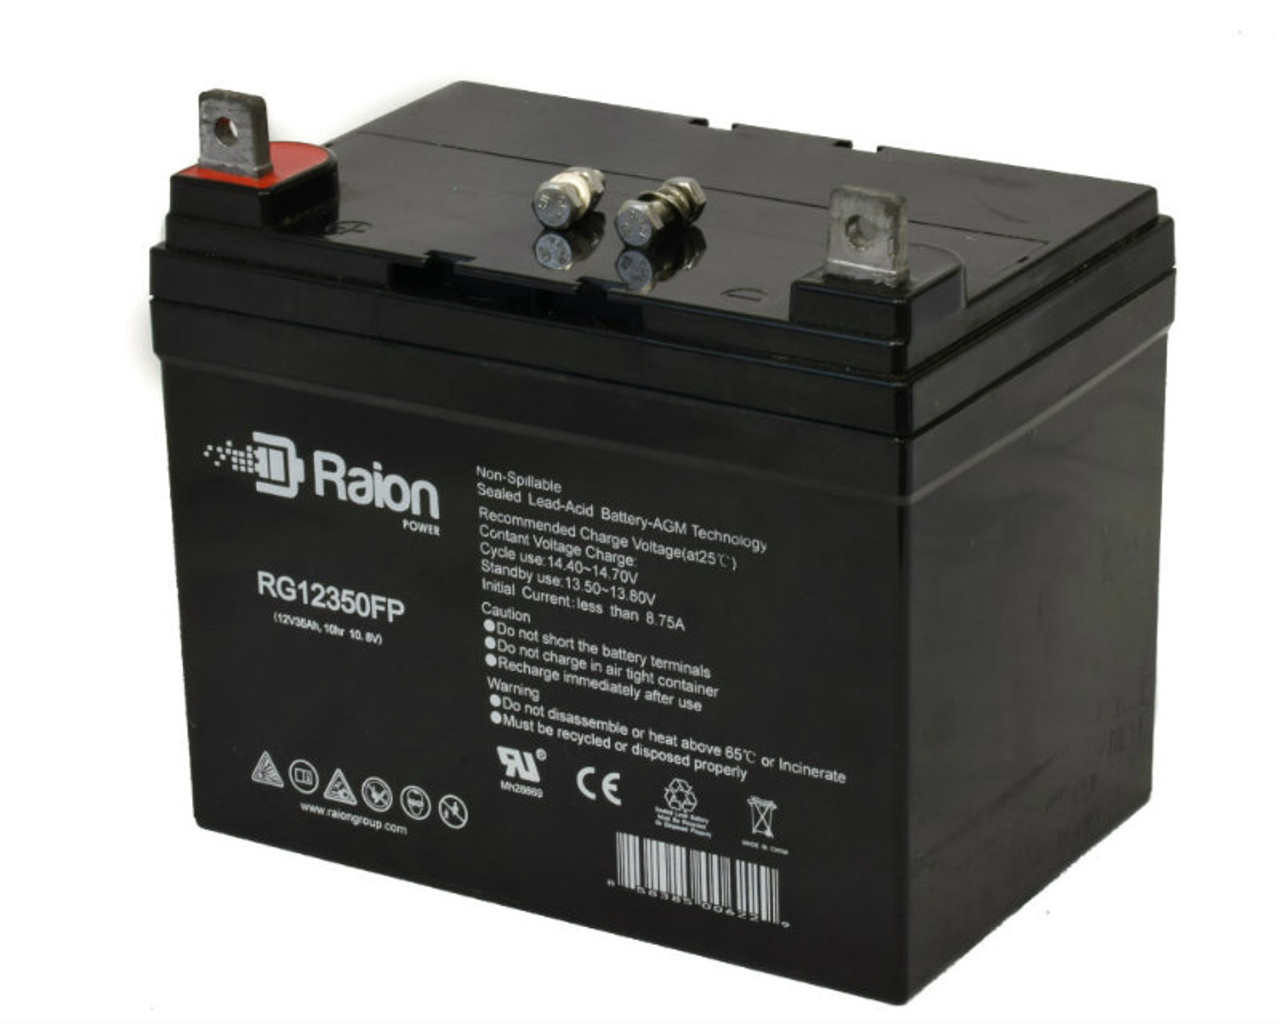 Raion Power Replacement 12V 35Ah Battery for Ingersol Equipment 5012 - 1 Pack